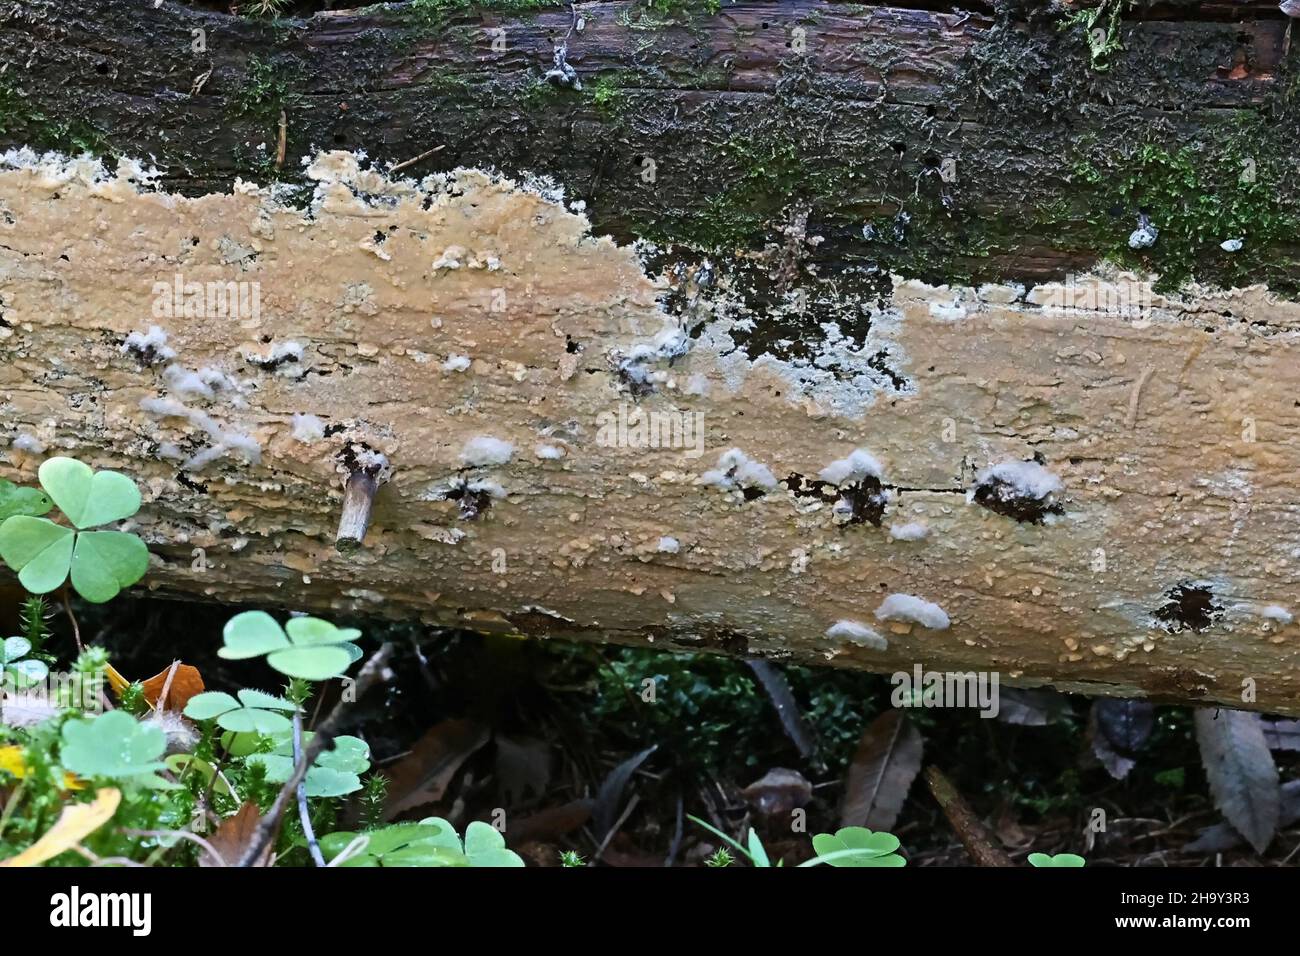 Vesiculomyces citrinus, also called Gloiothele citrina, a resupinate fungus growing on spruce log in Finland Stock Photo